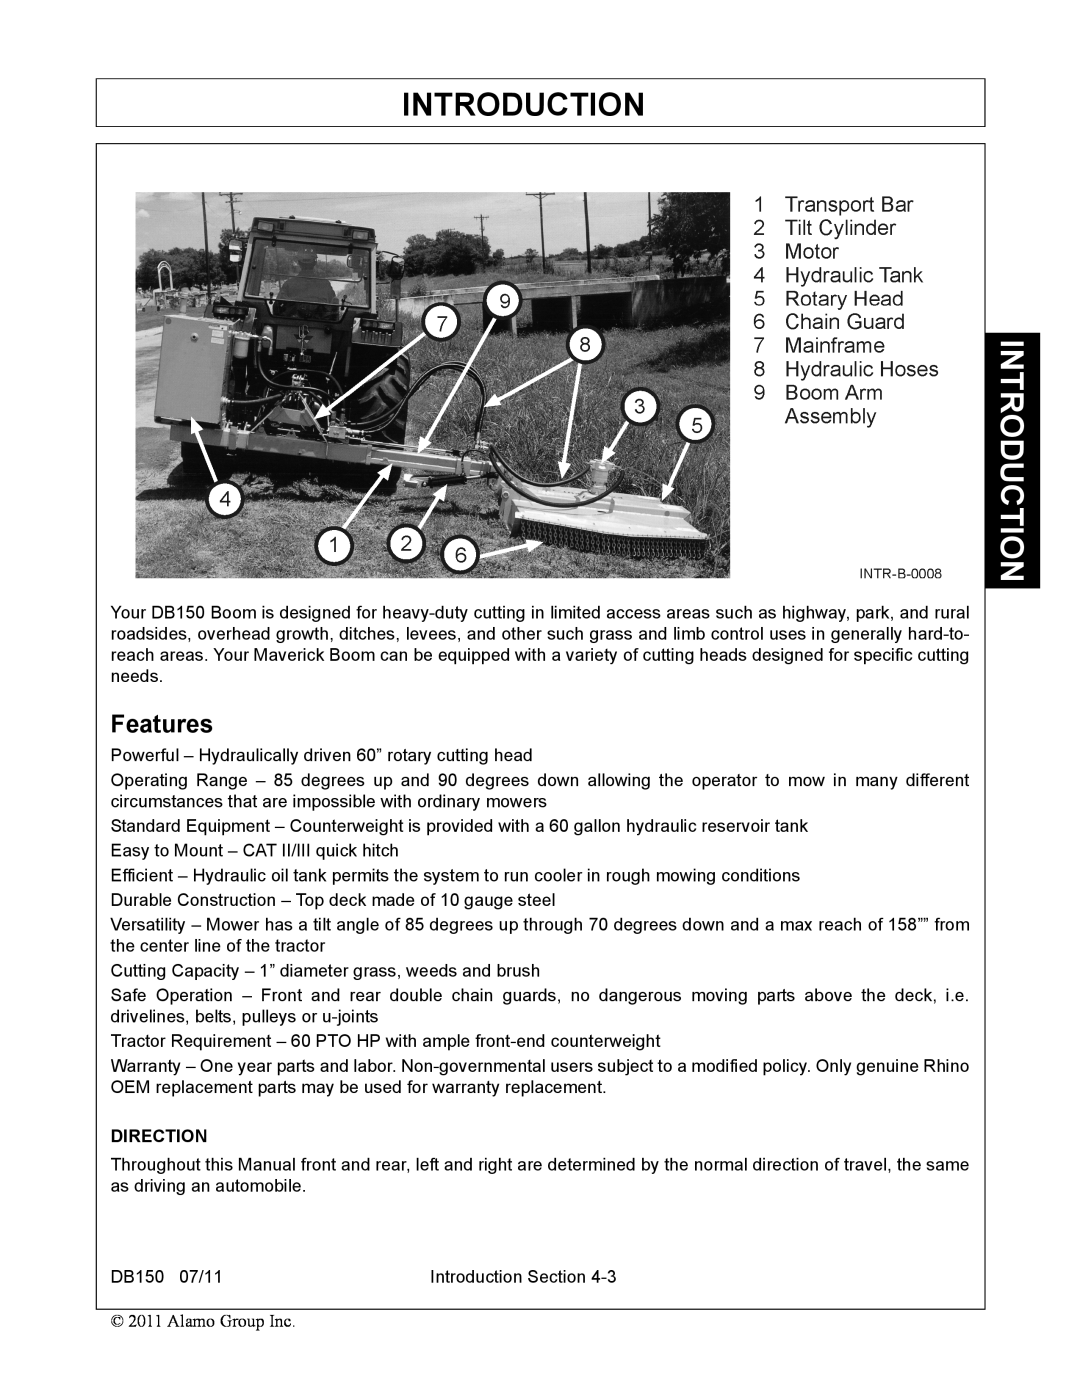 Rhino Mounts DB150 manual Features, Introduction, Direction 